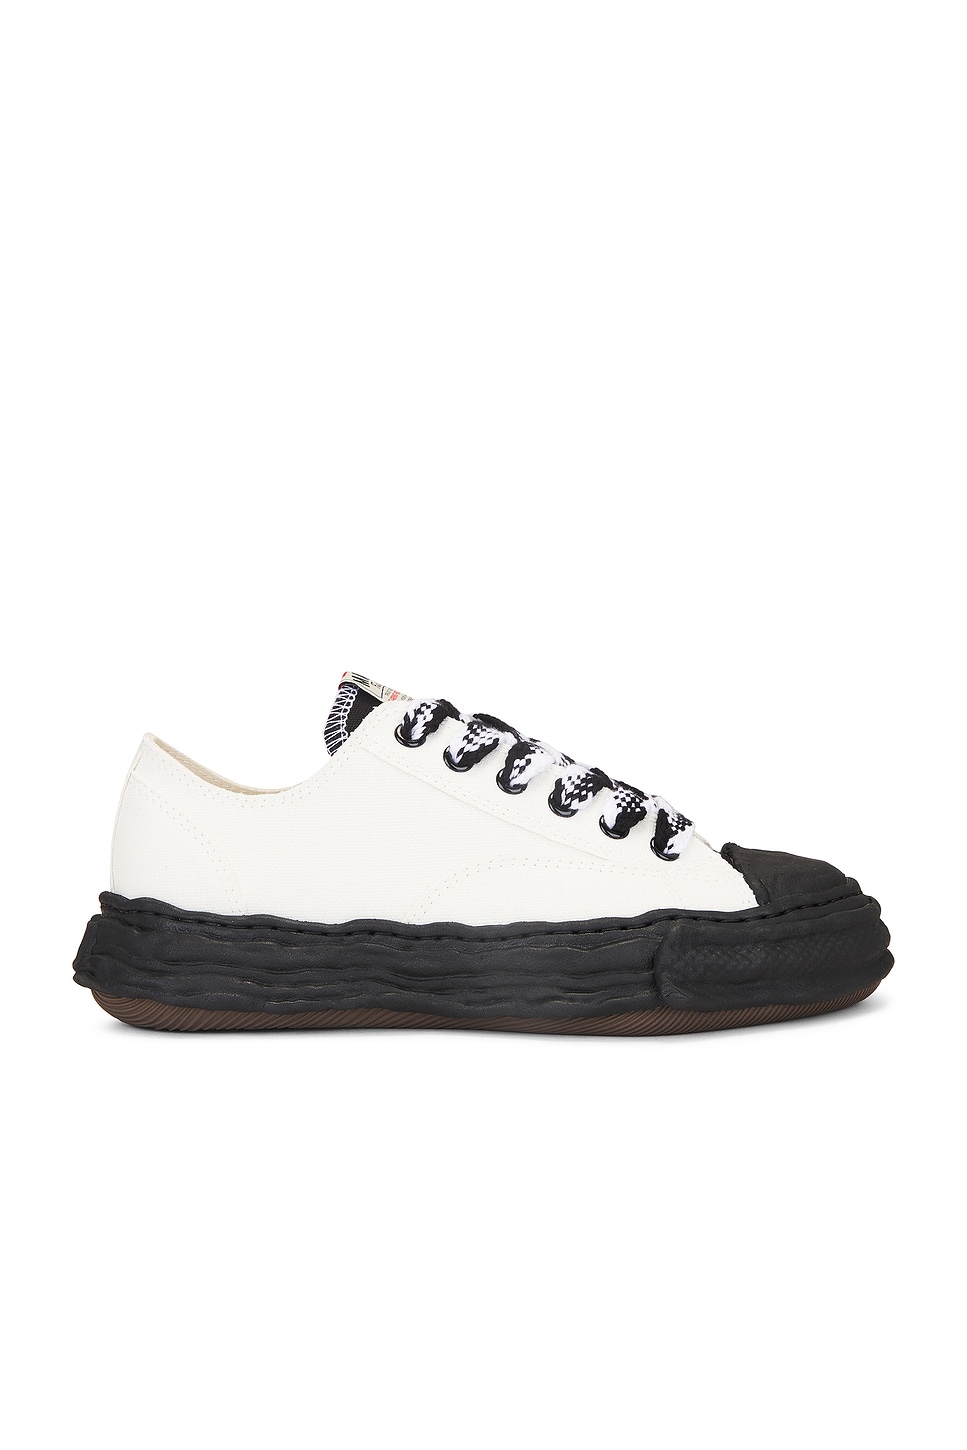 Image 1 of Maison MIHARA YASUHIRO Peterson 23 Low Original Sole Combination Color Canvas Low Top Sneaker in White